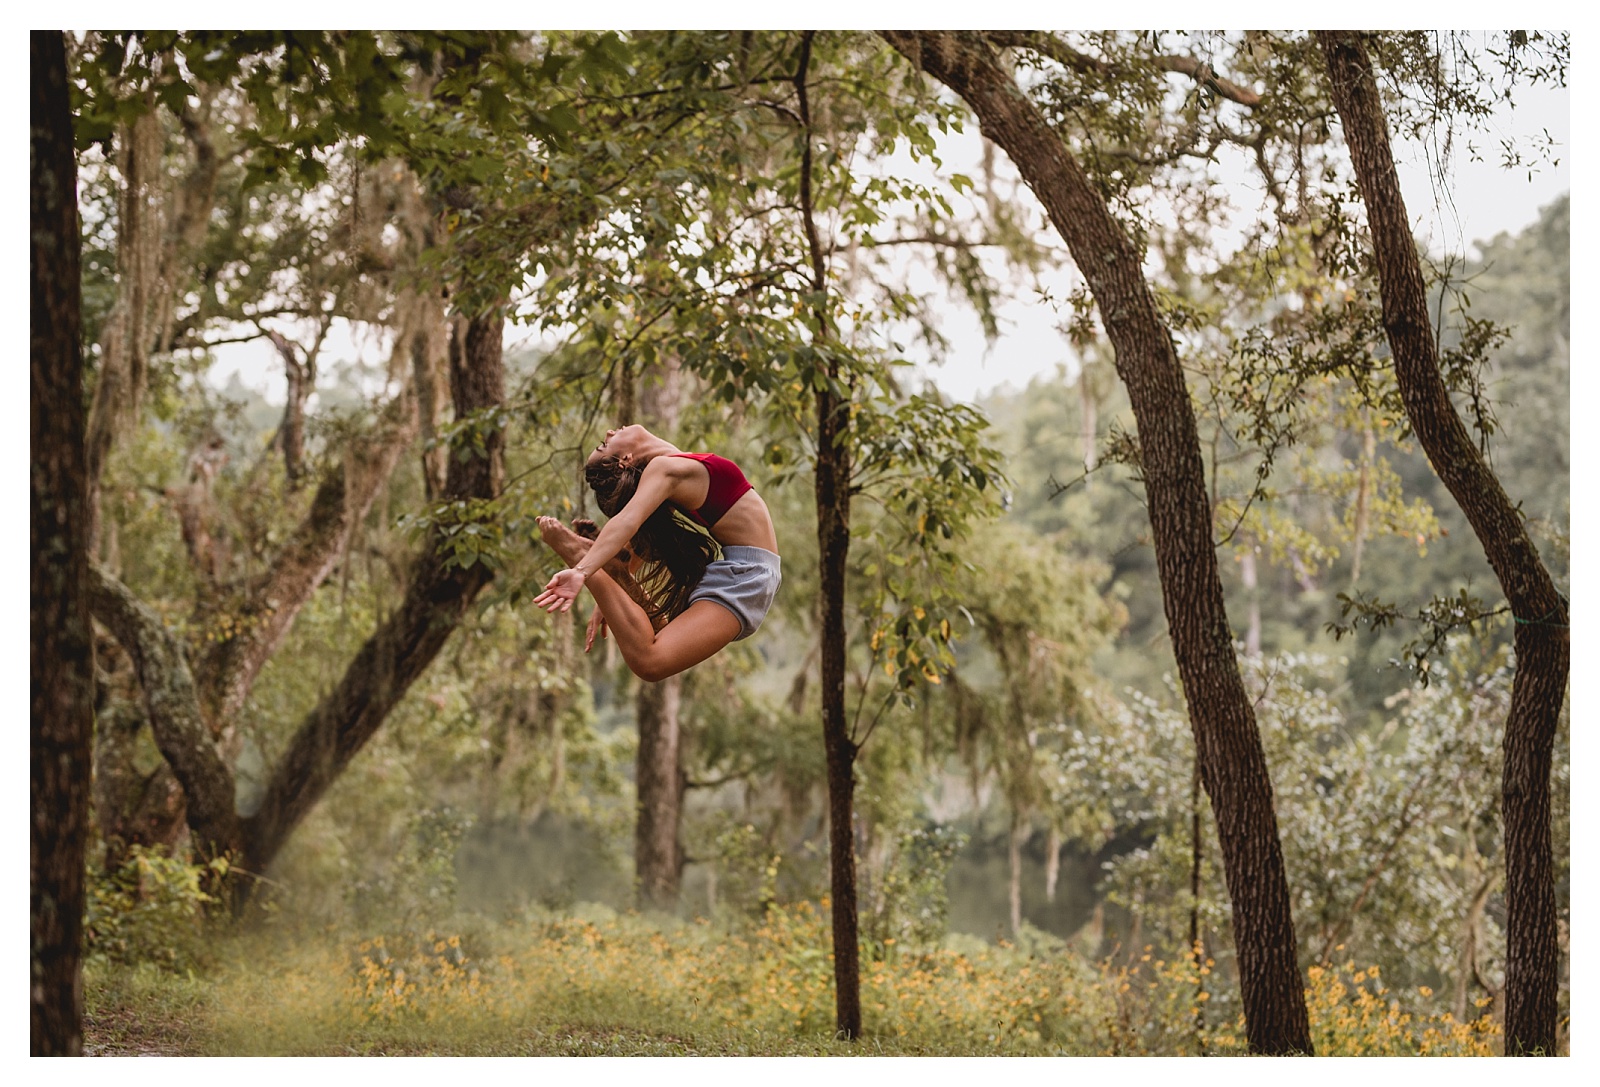 Dancer jumping during senior portraits. Shelly Williams Photography